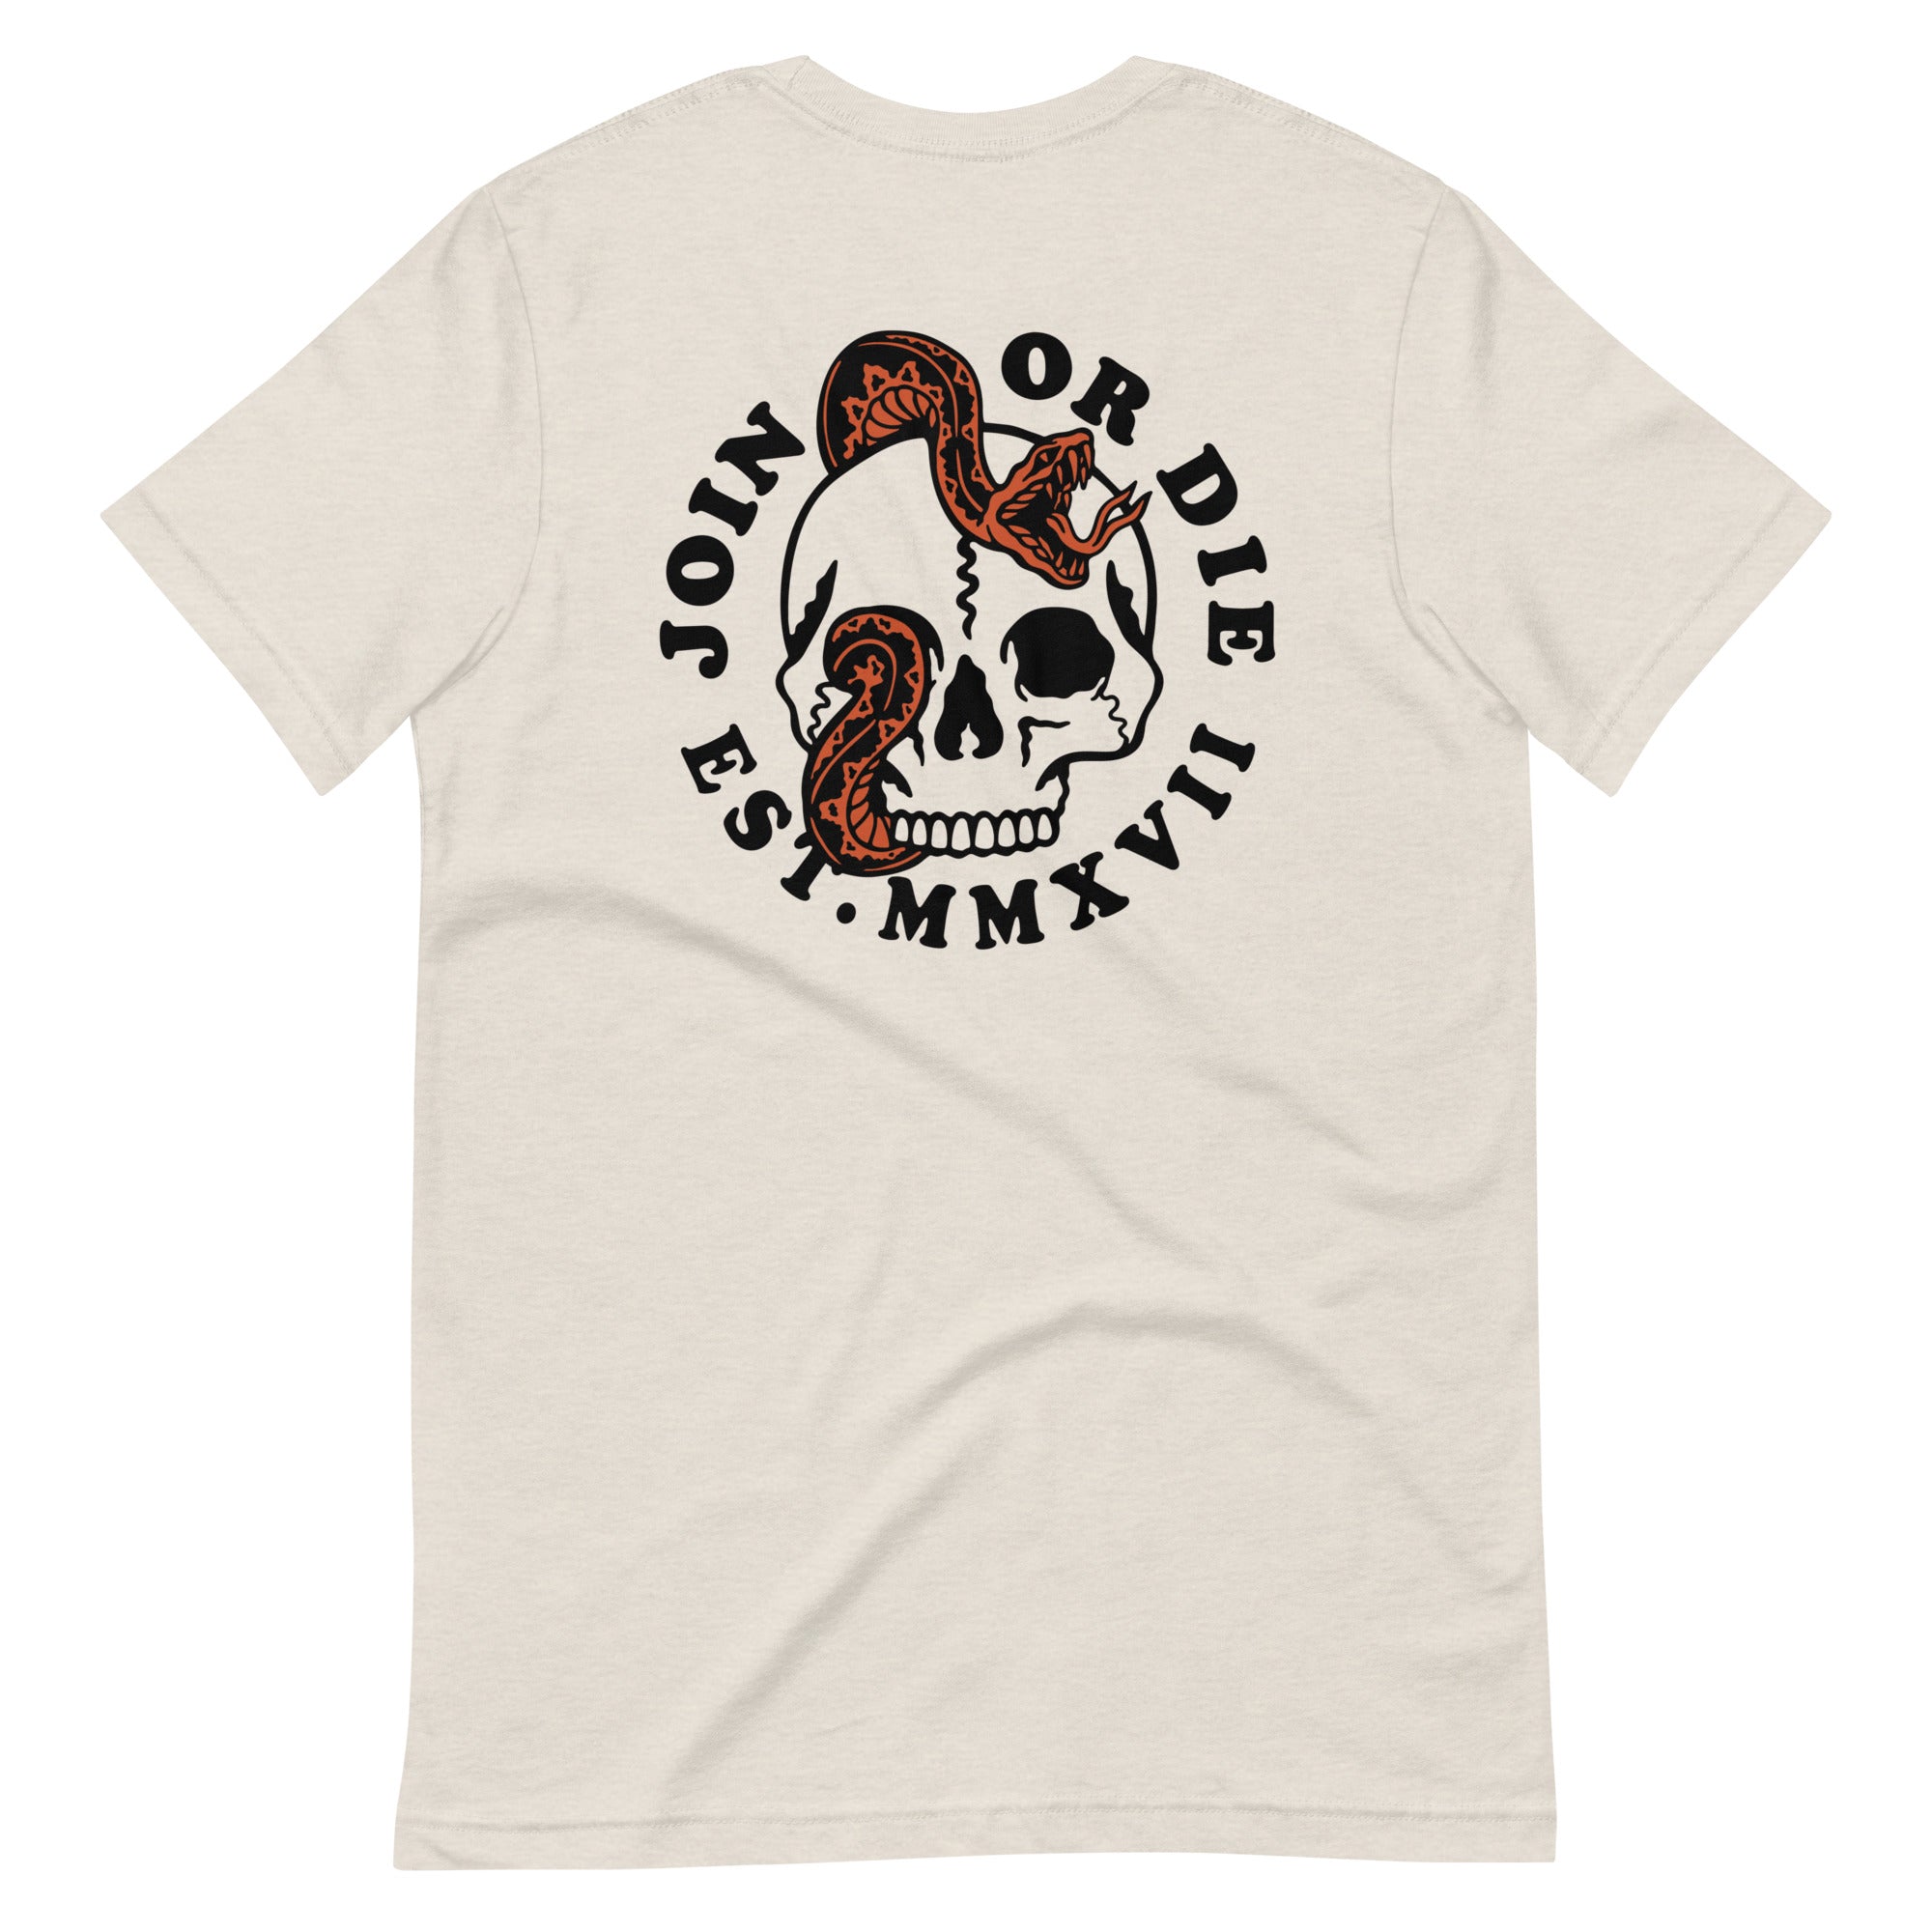 Join Or Die Shirt